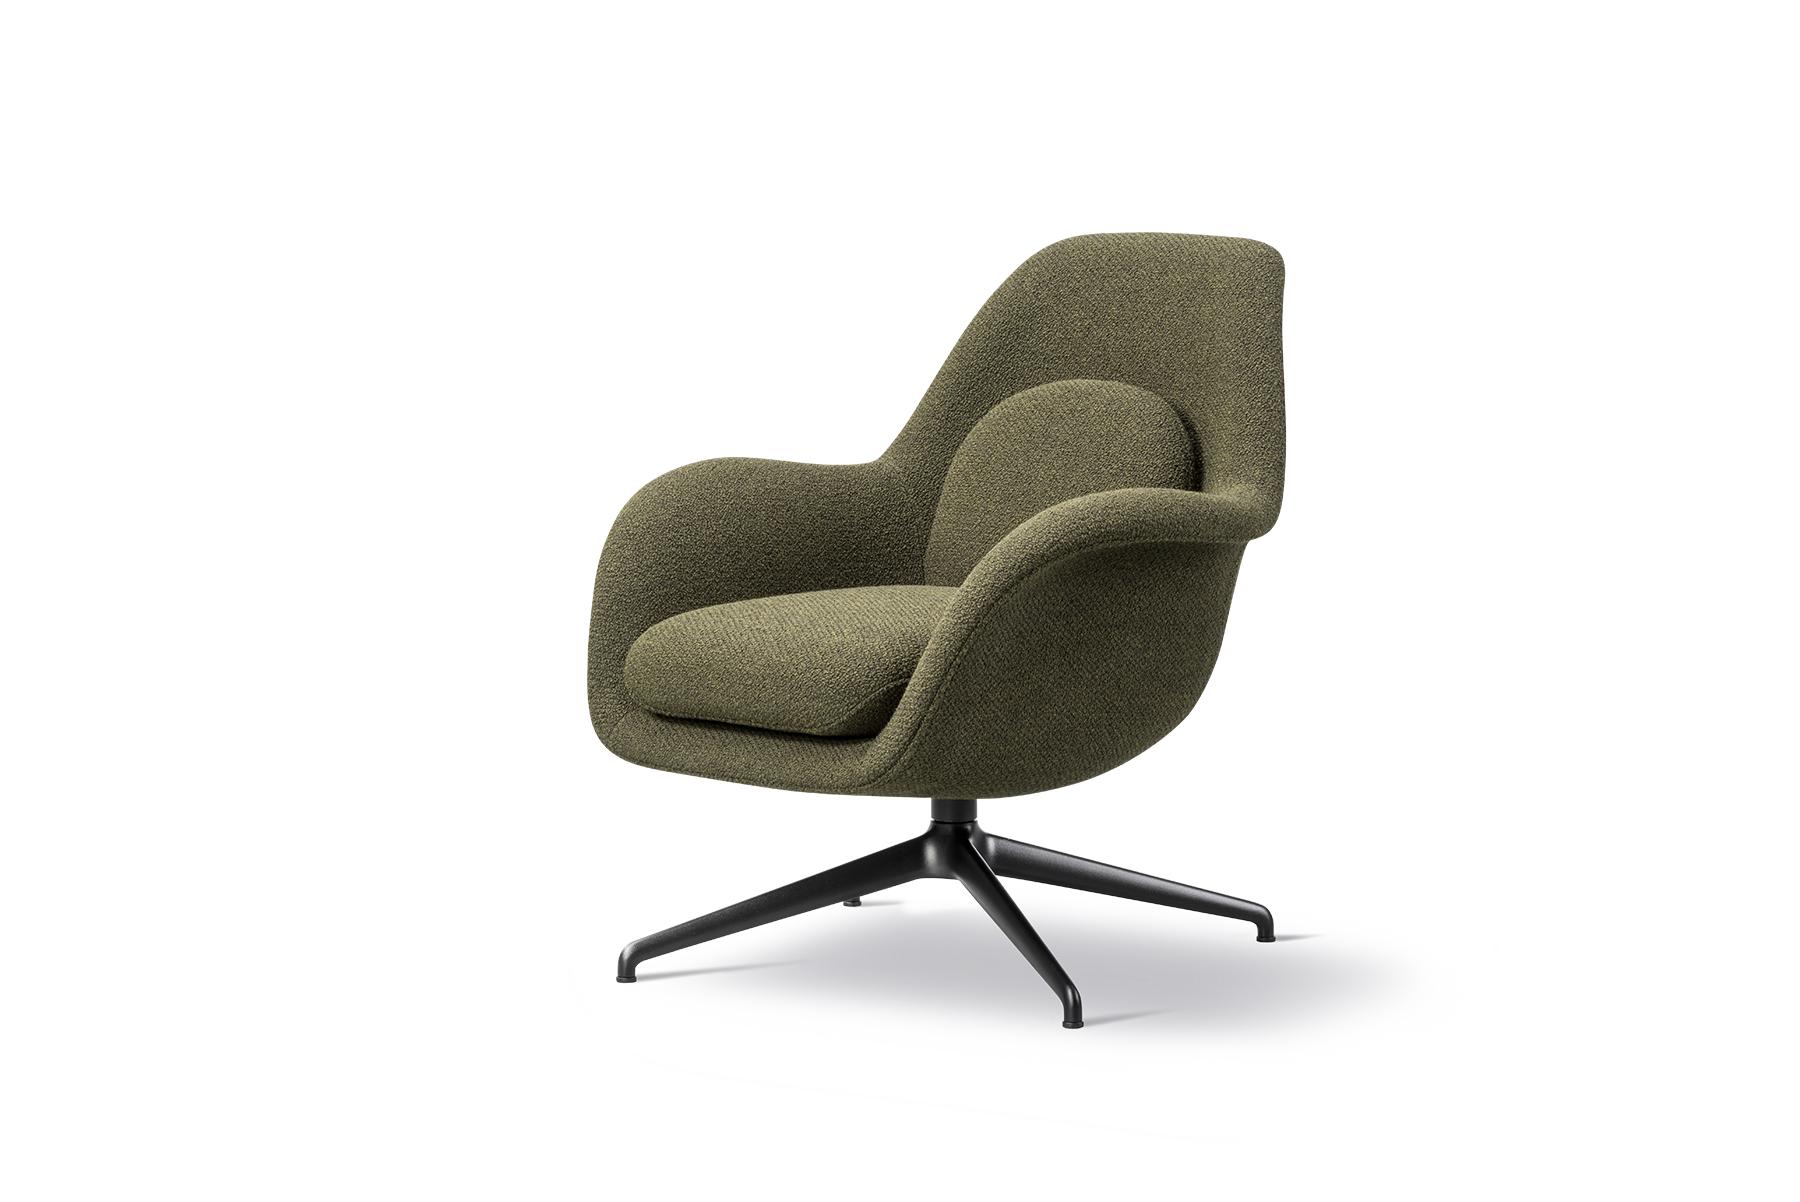 Space Copenhagen Swoon lounge chair, Petit, swivel base a line extension from the Swoon Lounge, the Swoon Lounge Petit has a similar shape but it’s more upright and somewhat smaller. The one-piece shell merging the back, seat and armrests are fully